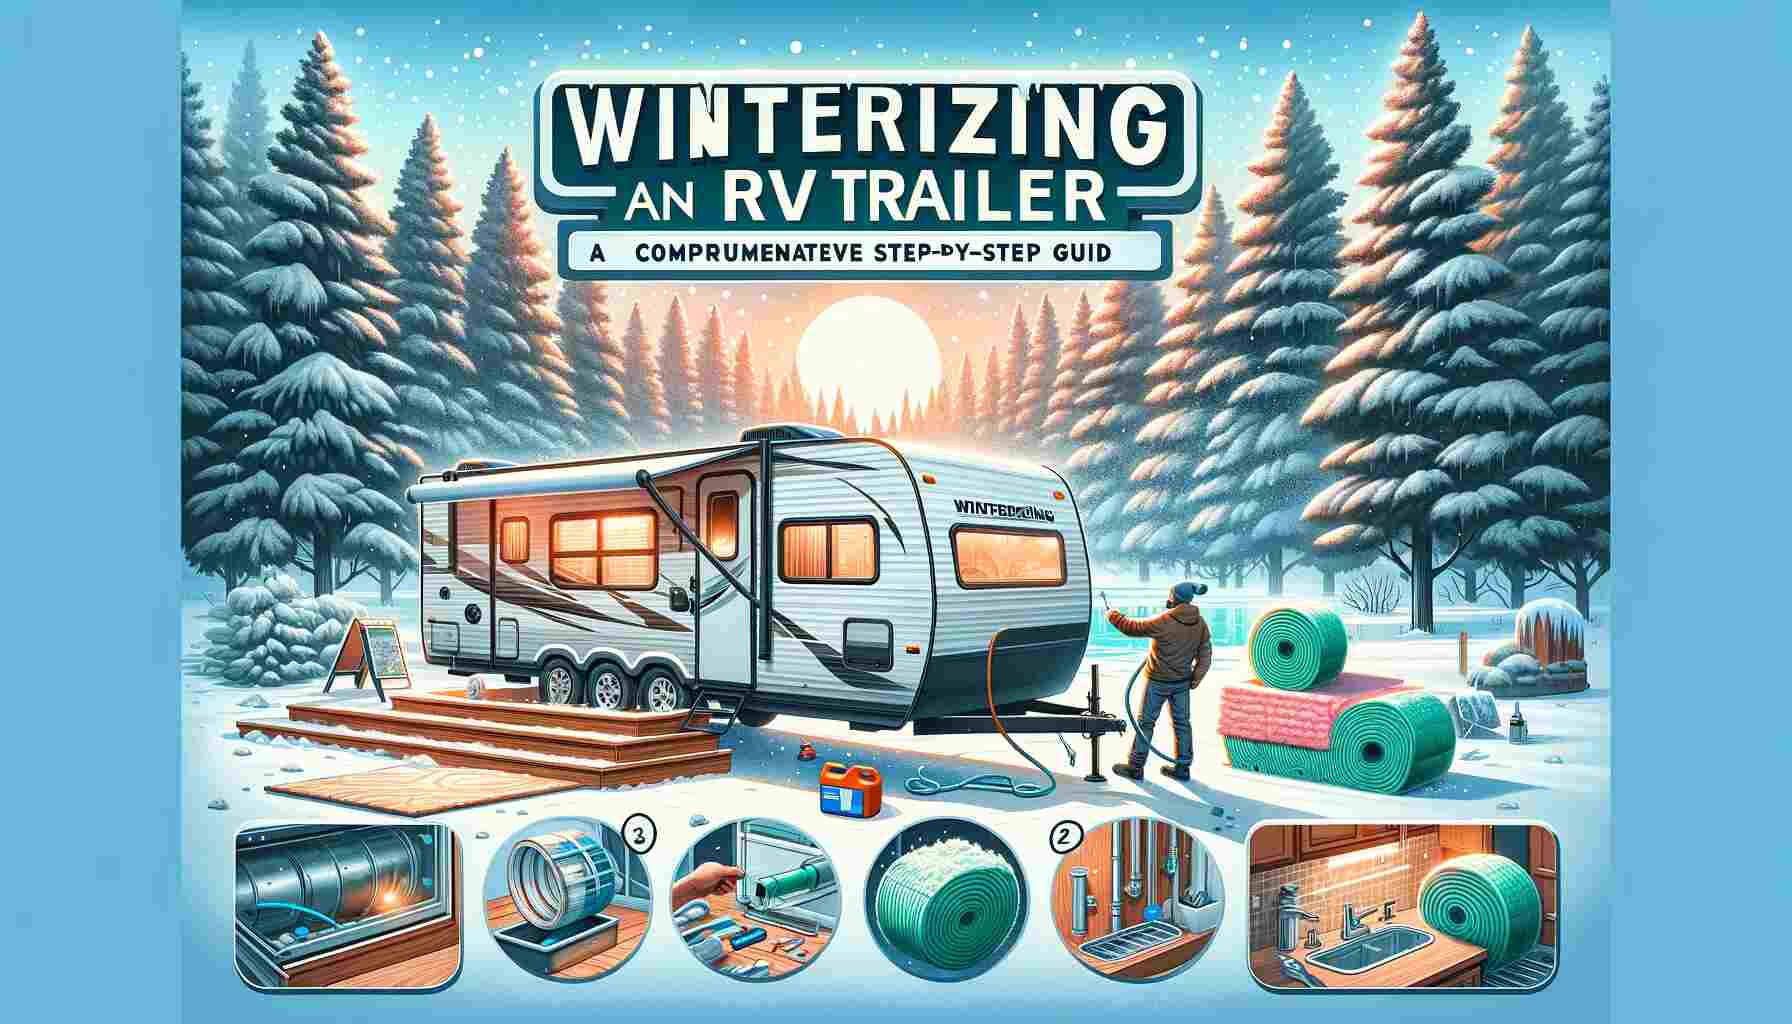 An RV trailer in a snowy landscape, being winterized. A person is shown wrapping pipes, installing thermal window covers, and adding antifreeze. The background features snow-covered trees, and the image has an overlay text: 'Winterizing an RV Trailer: A Comprehensive Step-By-Step Guide'.